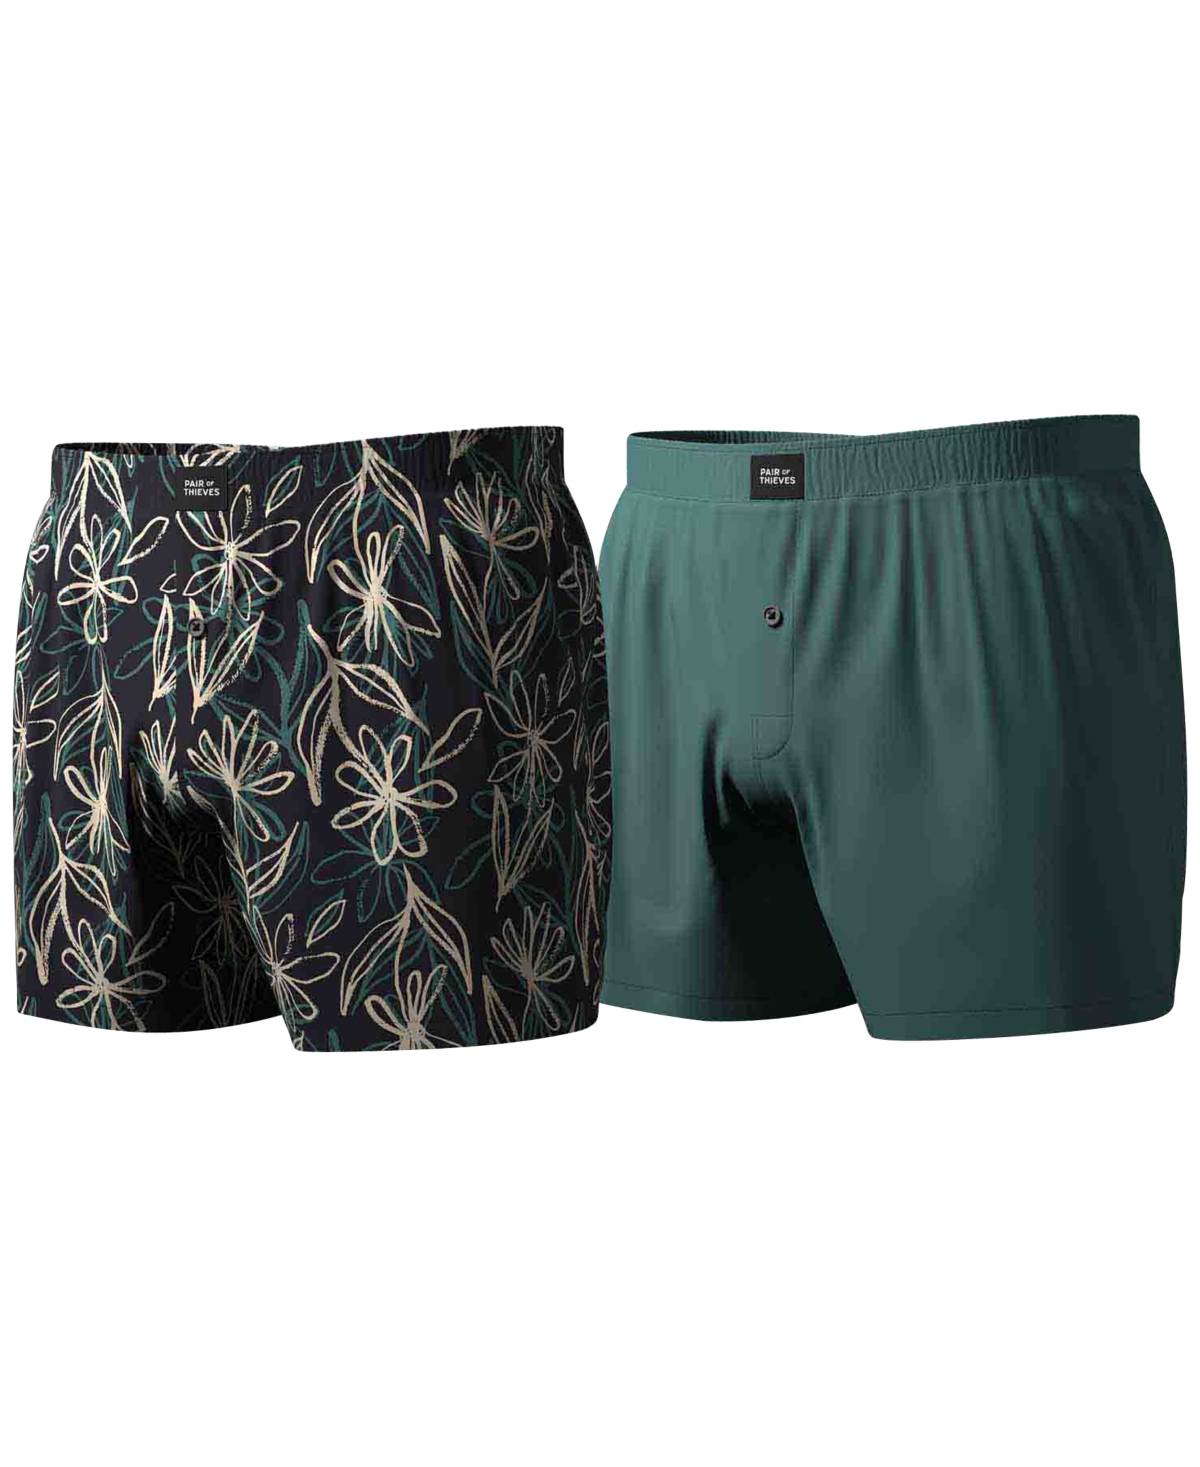 Pair Of Thieves Men's 2-pk. Woven Boxers In Spruce